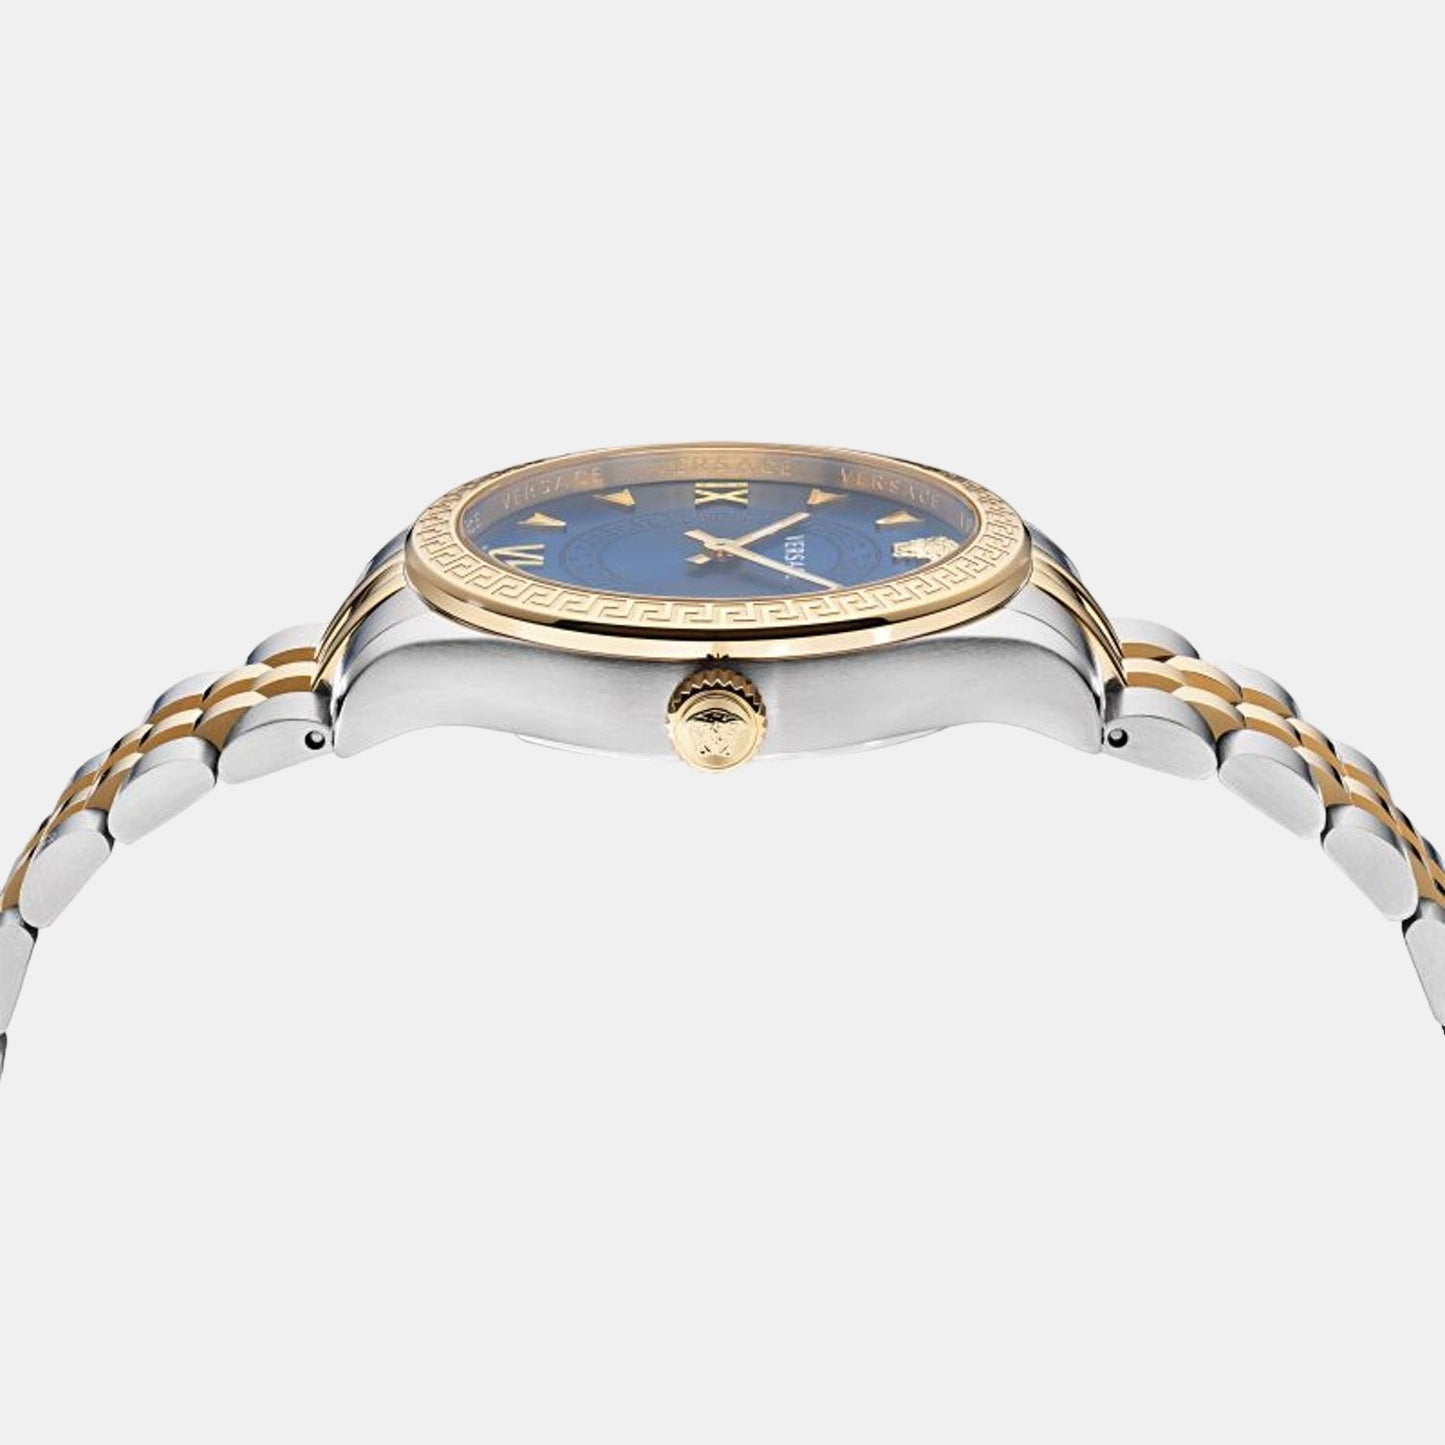 versace-stainless-steel-blue-analog-female-watch-ve2s00522